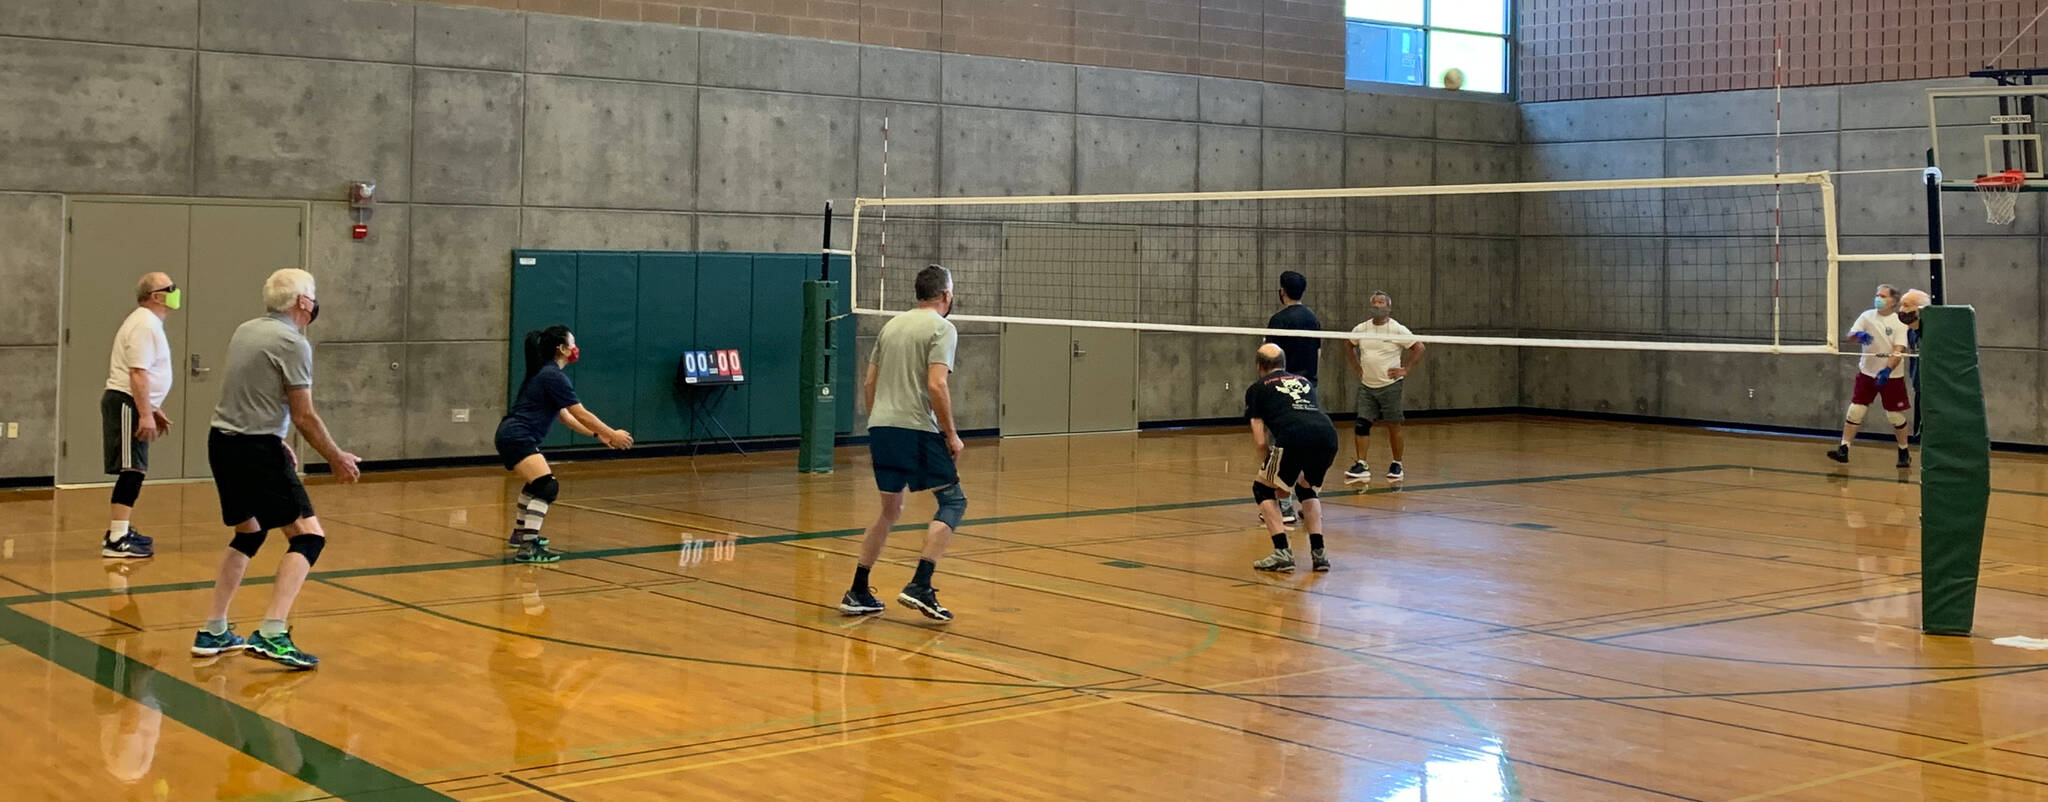 Volleyball players get in some action on Jan. 4 at the Mercer Island Community and Event Center. Photo courtesy of city of Mercer Island